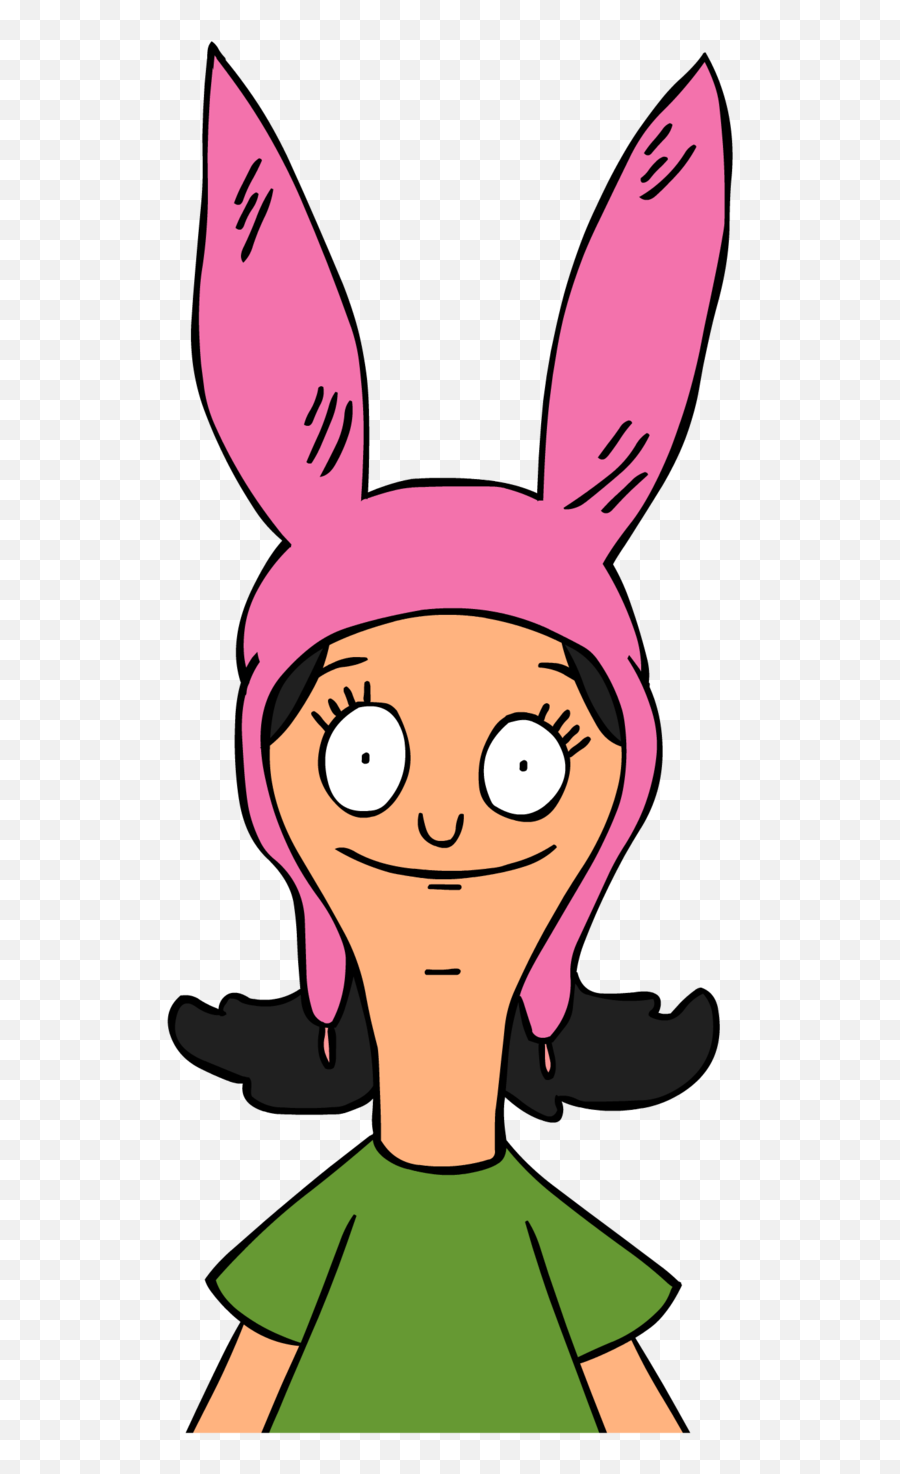 Download Hd Louise By The2ndd Bobs - Louis From Burgers Emoji,Bob's Burgers Logo